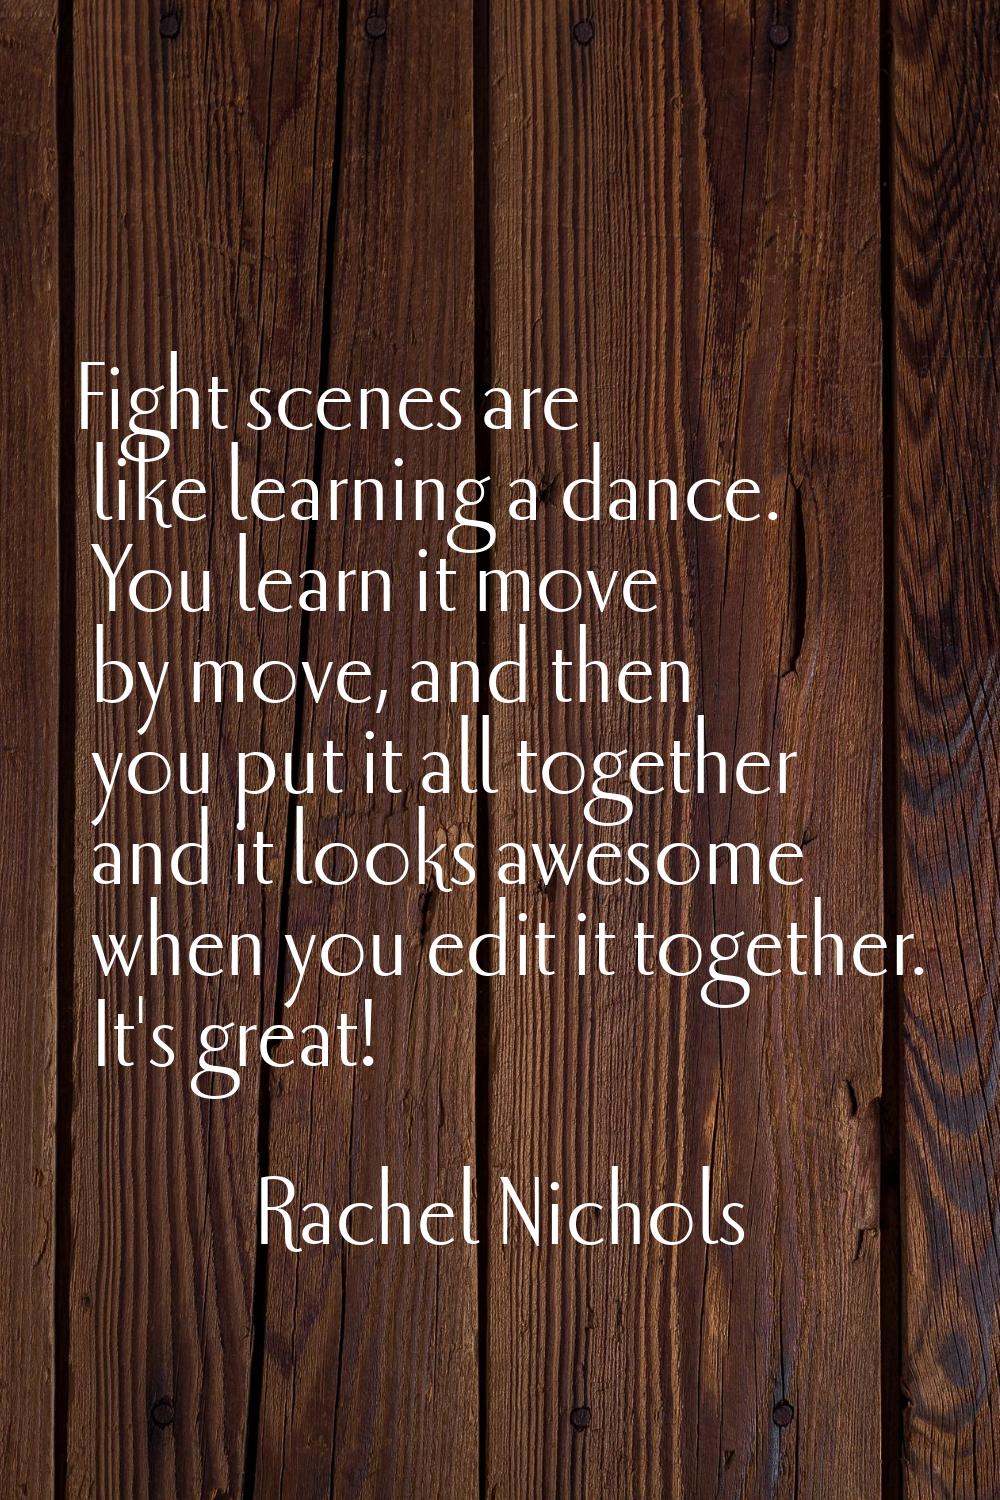 Fight scenes are like learning a dance. You learn it move by move, and then you put it all together